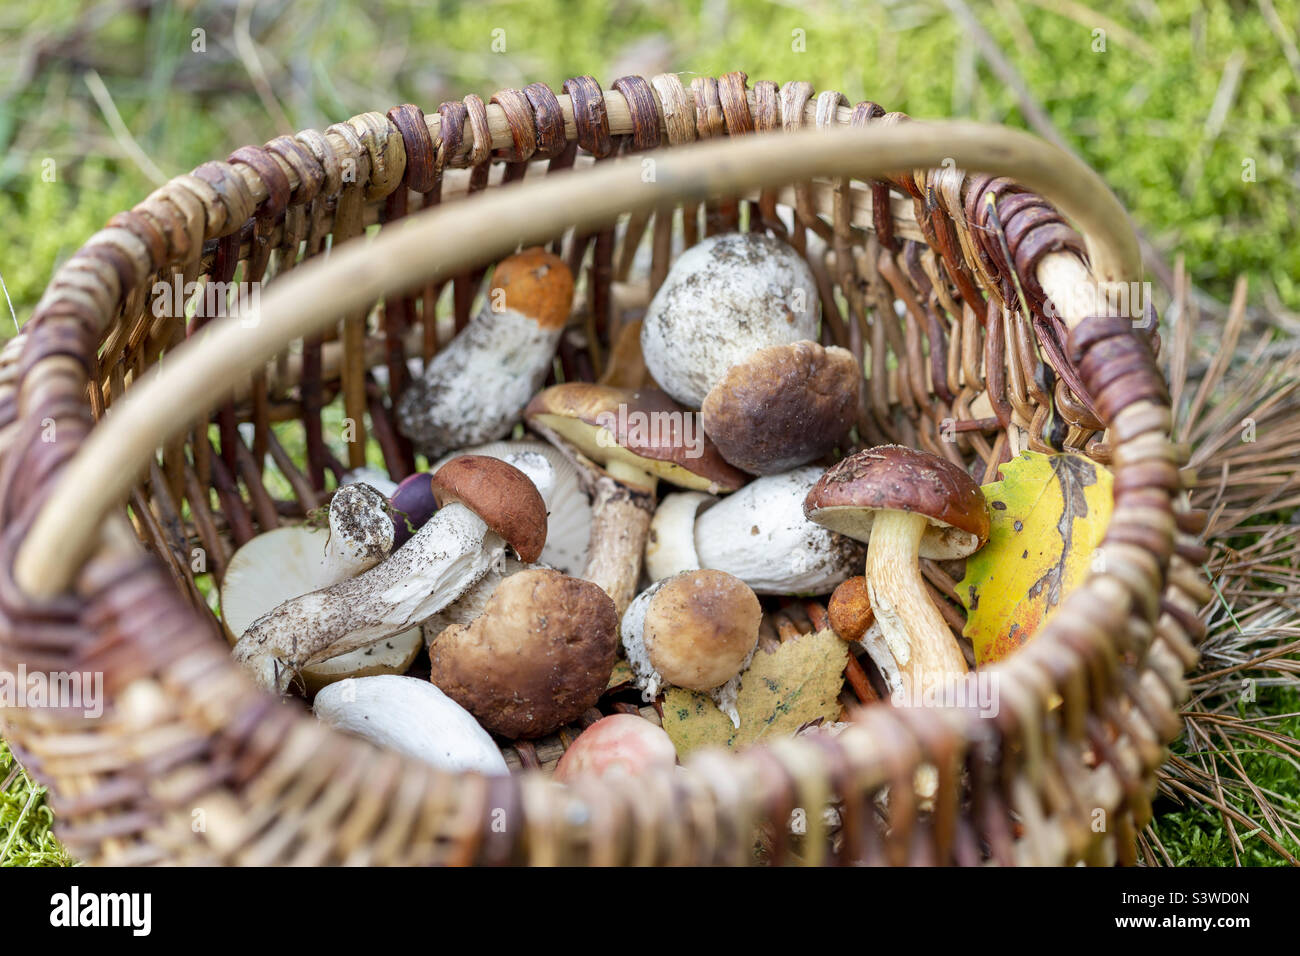 Basket of edible mushrooms, picked from the forest in autumn. Closeup. Stock Photo